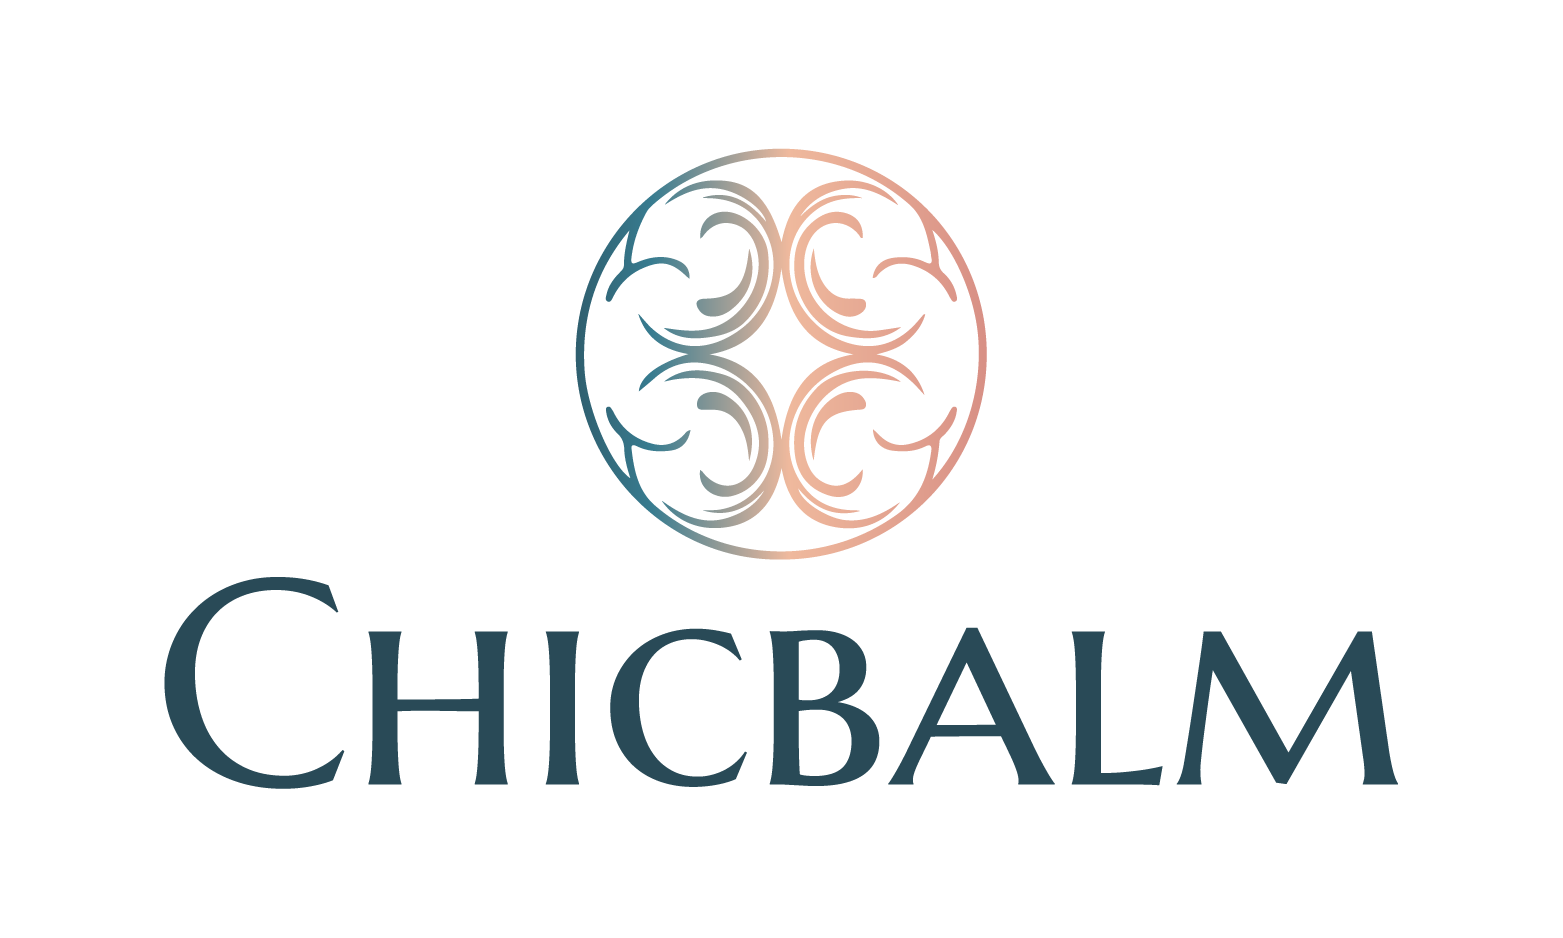 Chicbalm.com - Creative brandable domain for sale